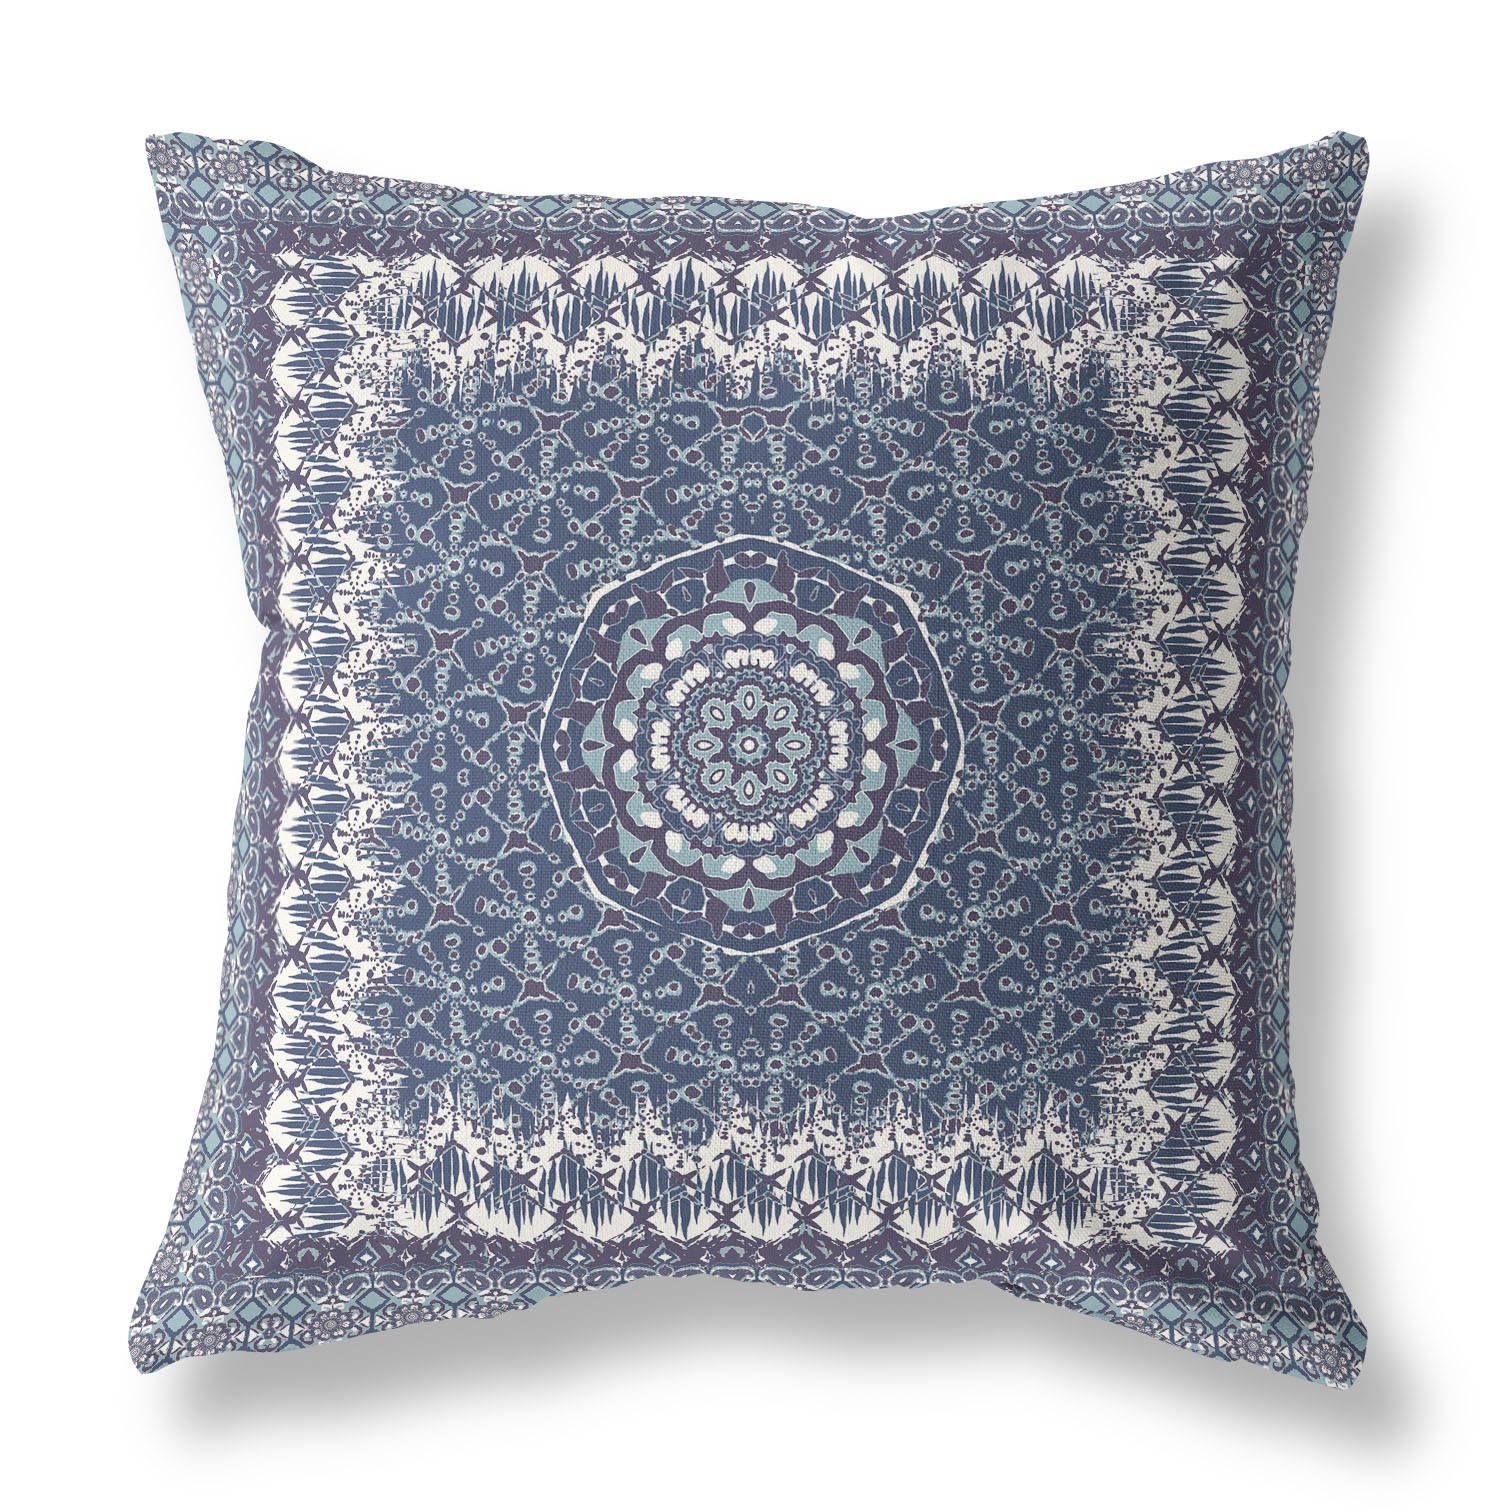 Holy Tie Die Flower Broadcloth Indoor Outdoor Blown and Closed Pillow by Amrita Sen in Indigo White-414655-1